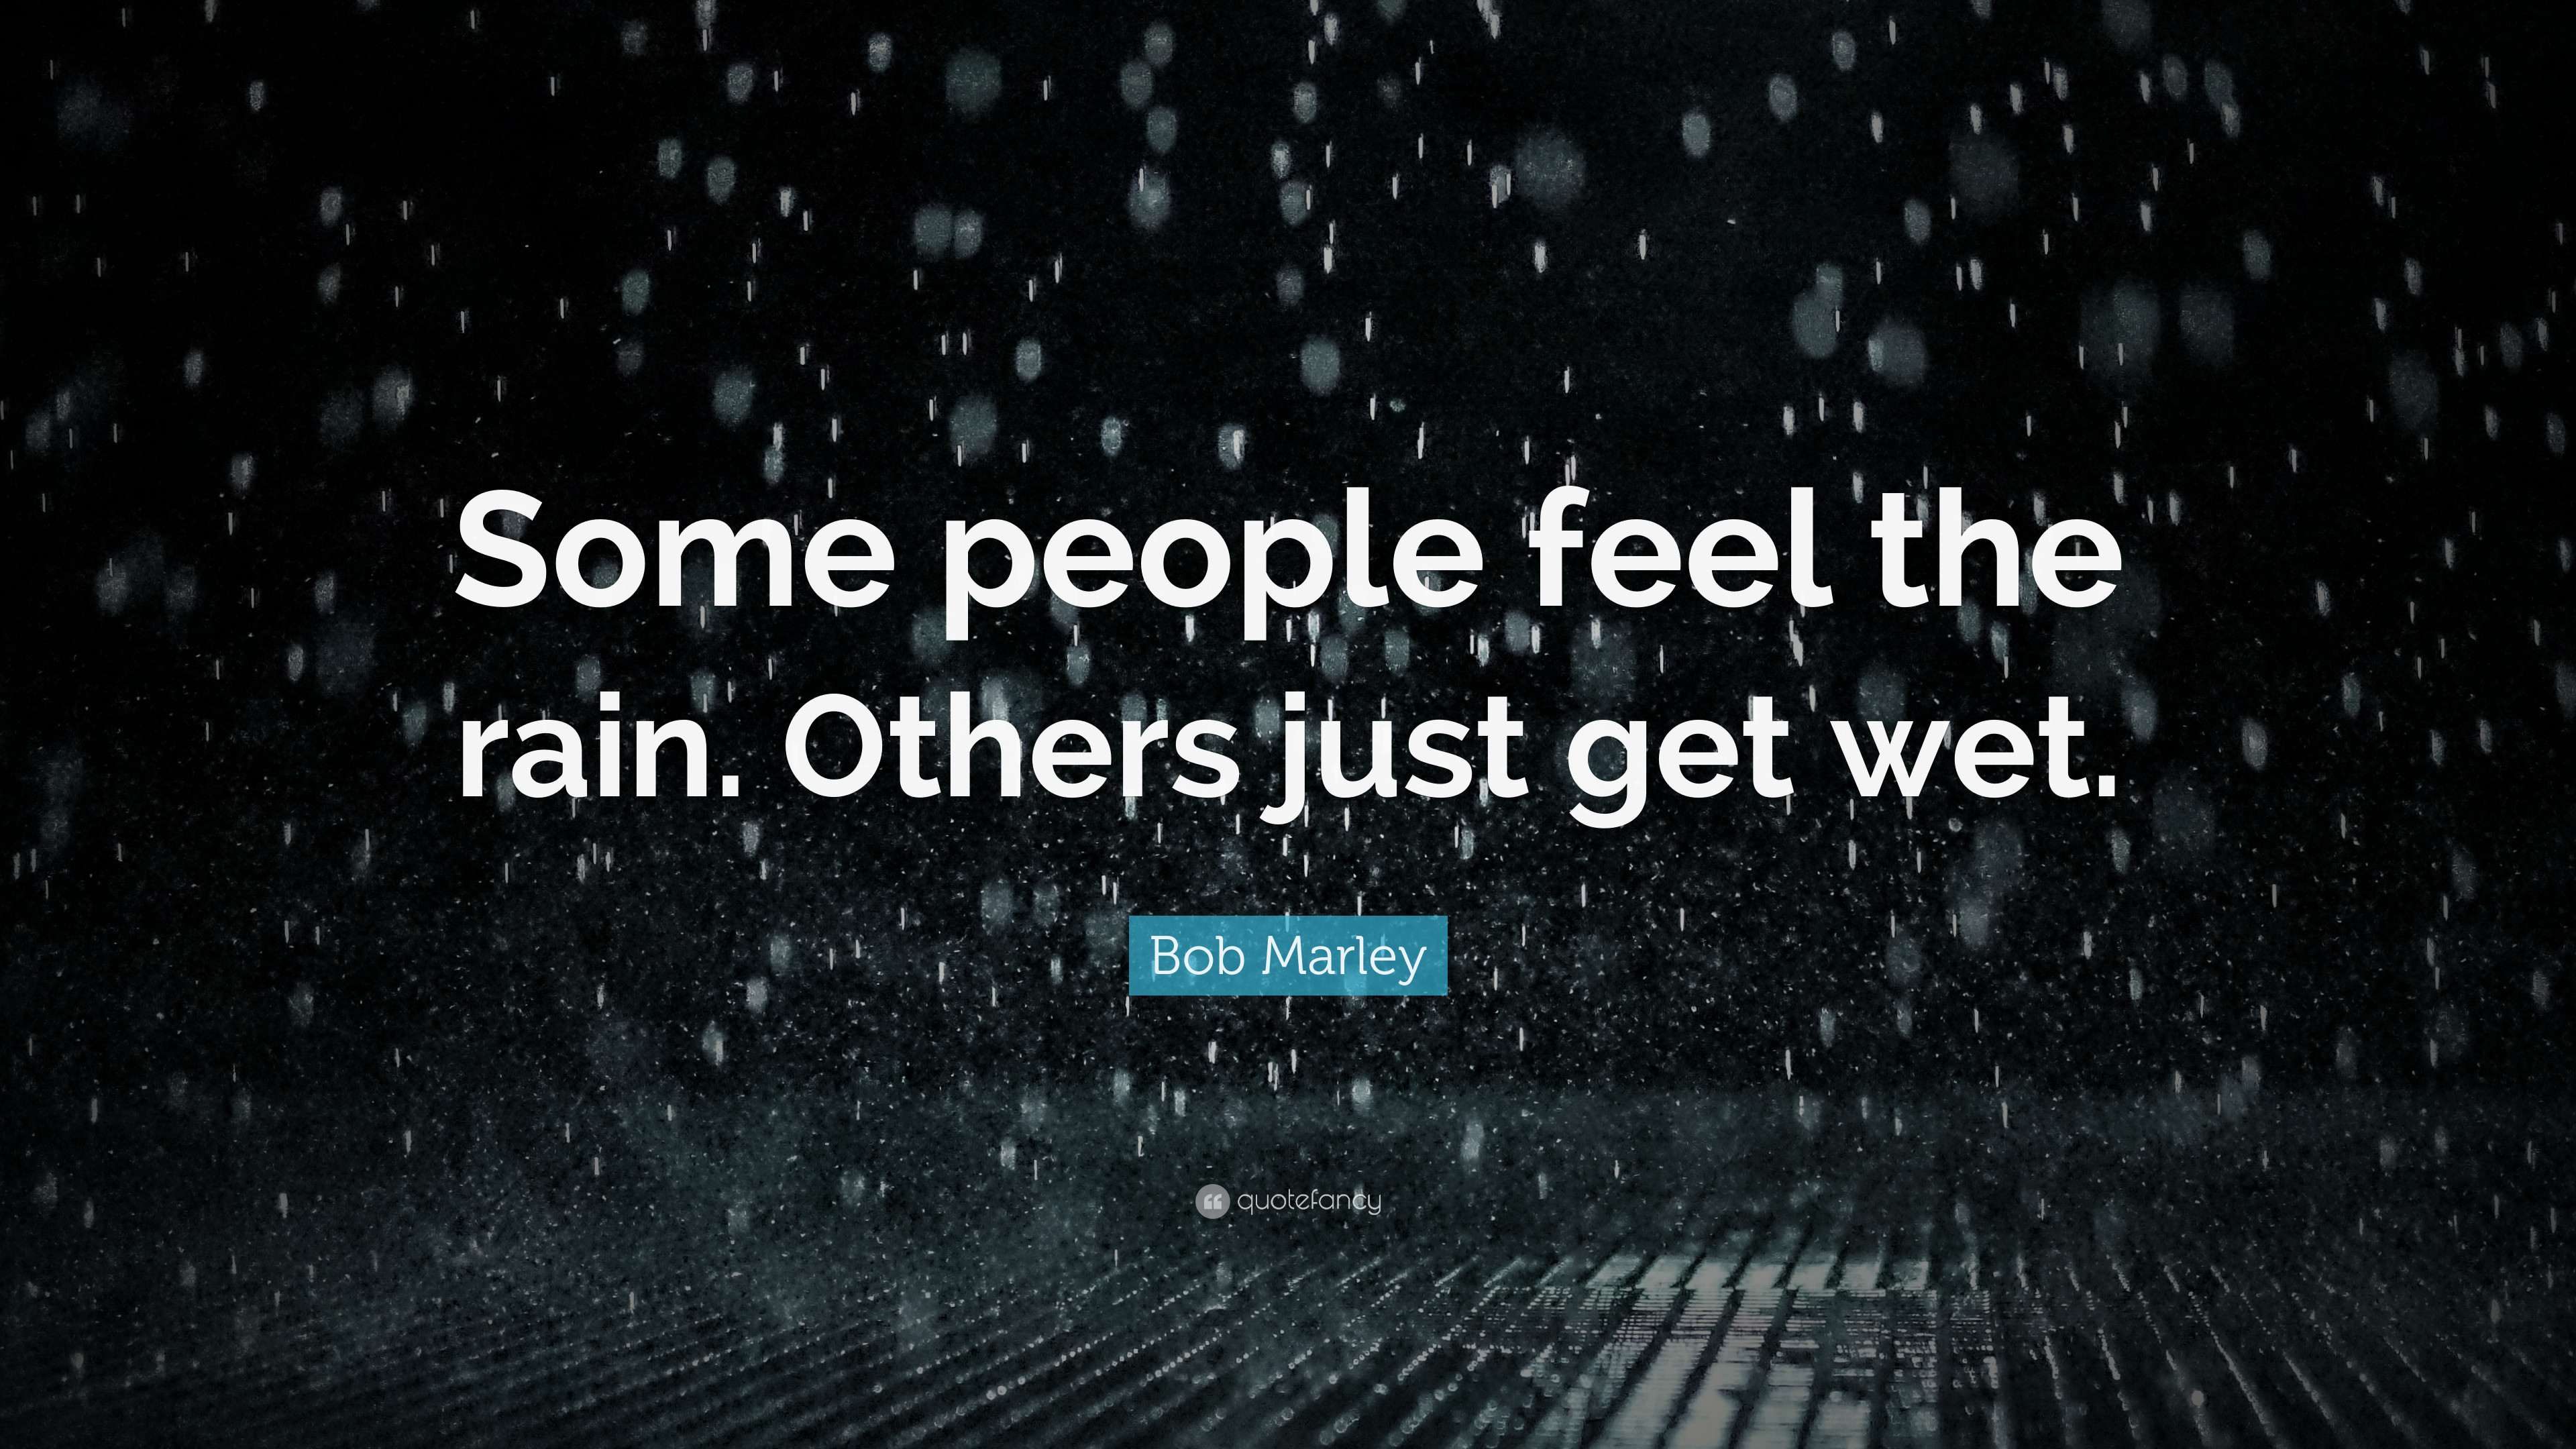 3840x2160 Bob Marley Quote: “Some people feel the rain. Others just get wet.